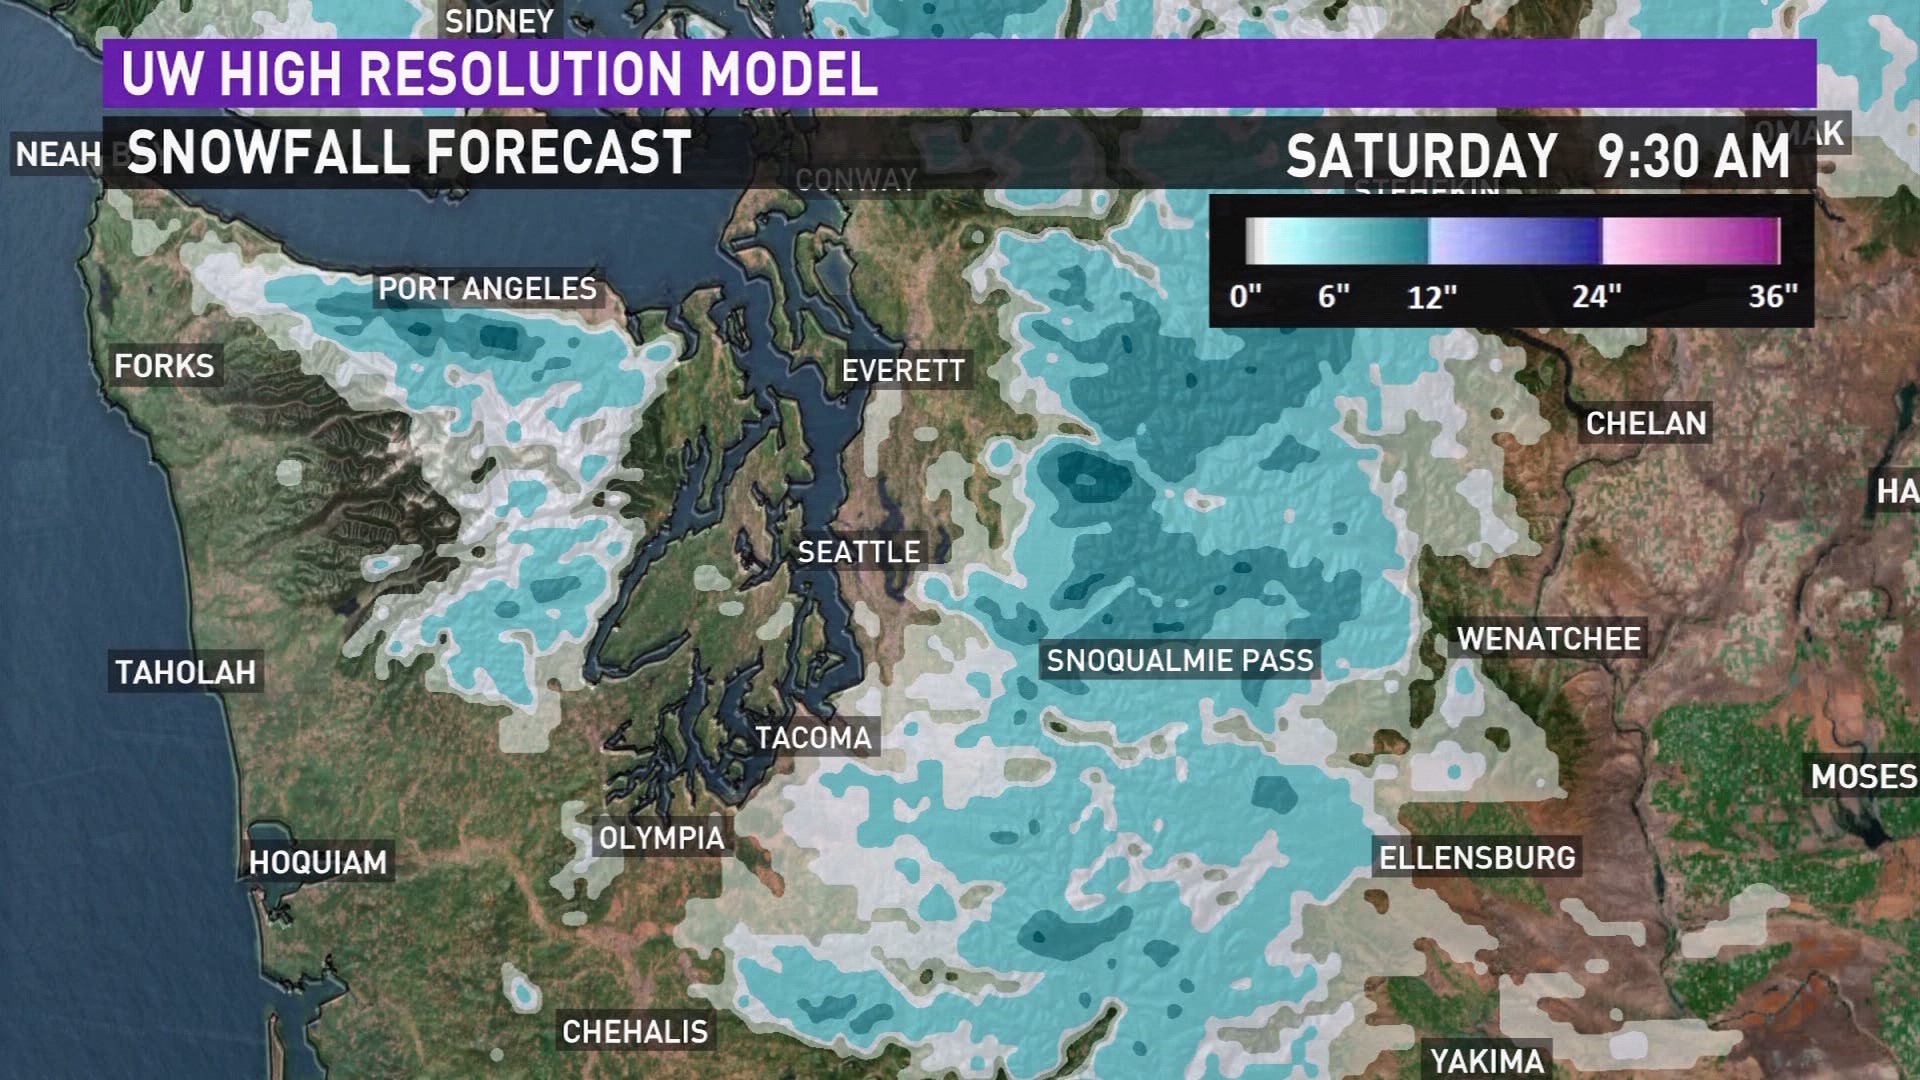 New graphics help forecast snow more accurately